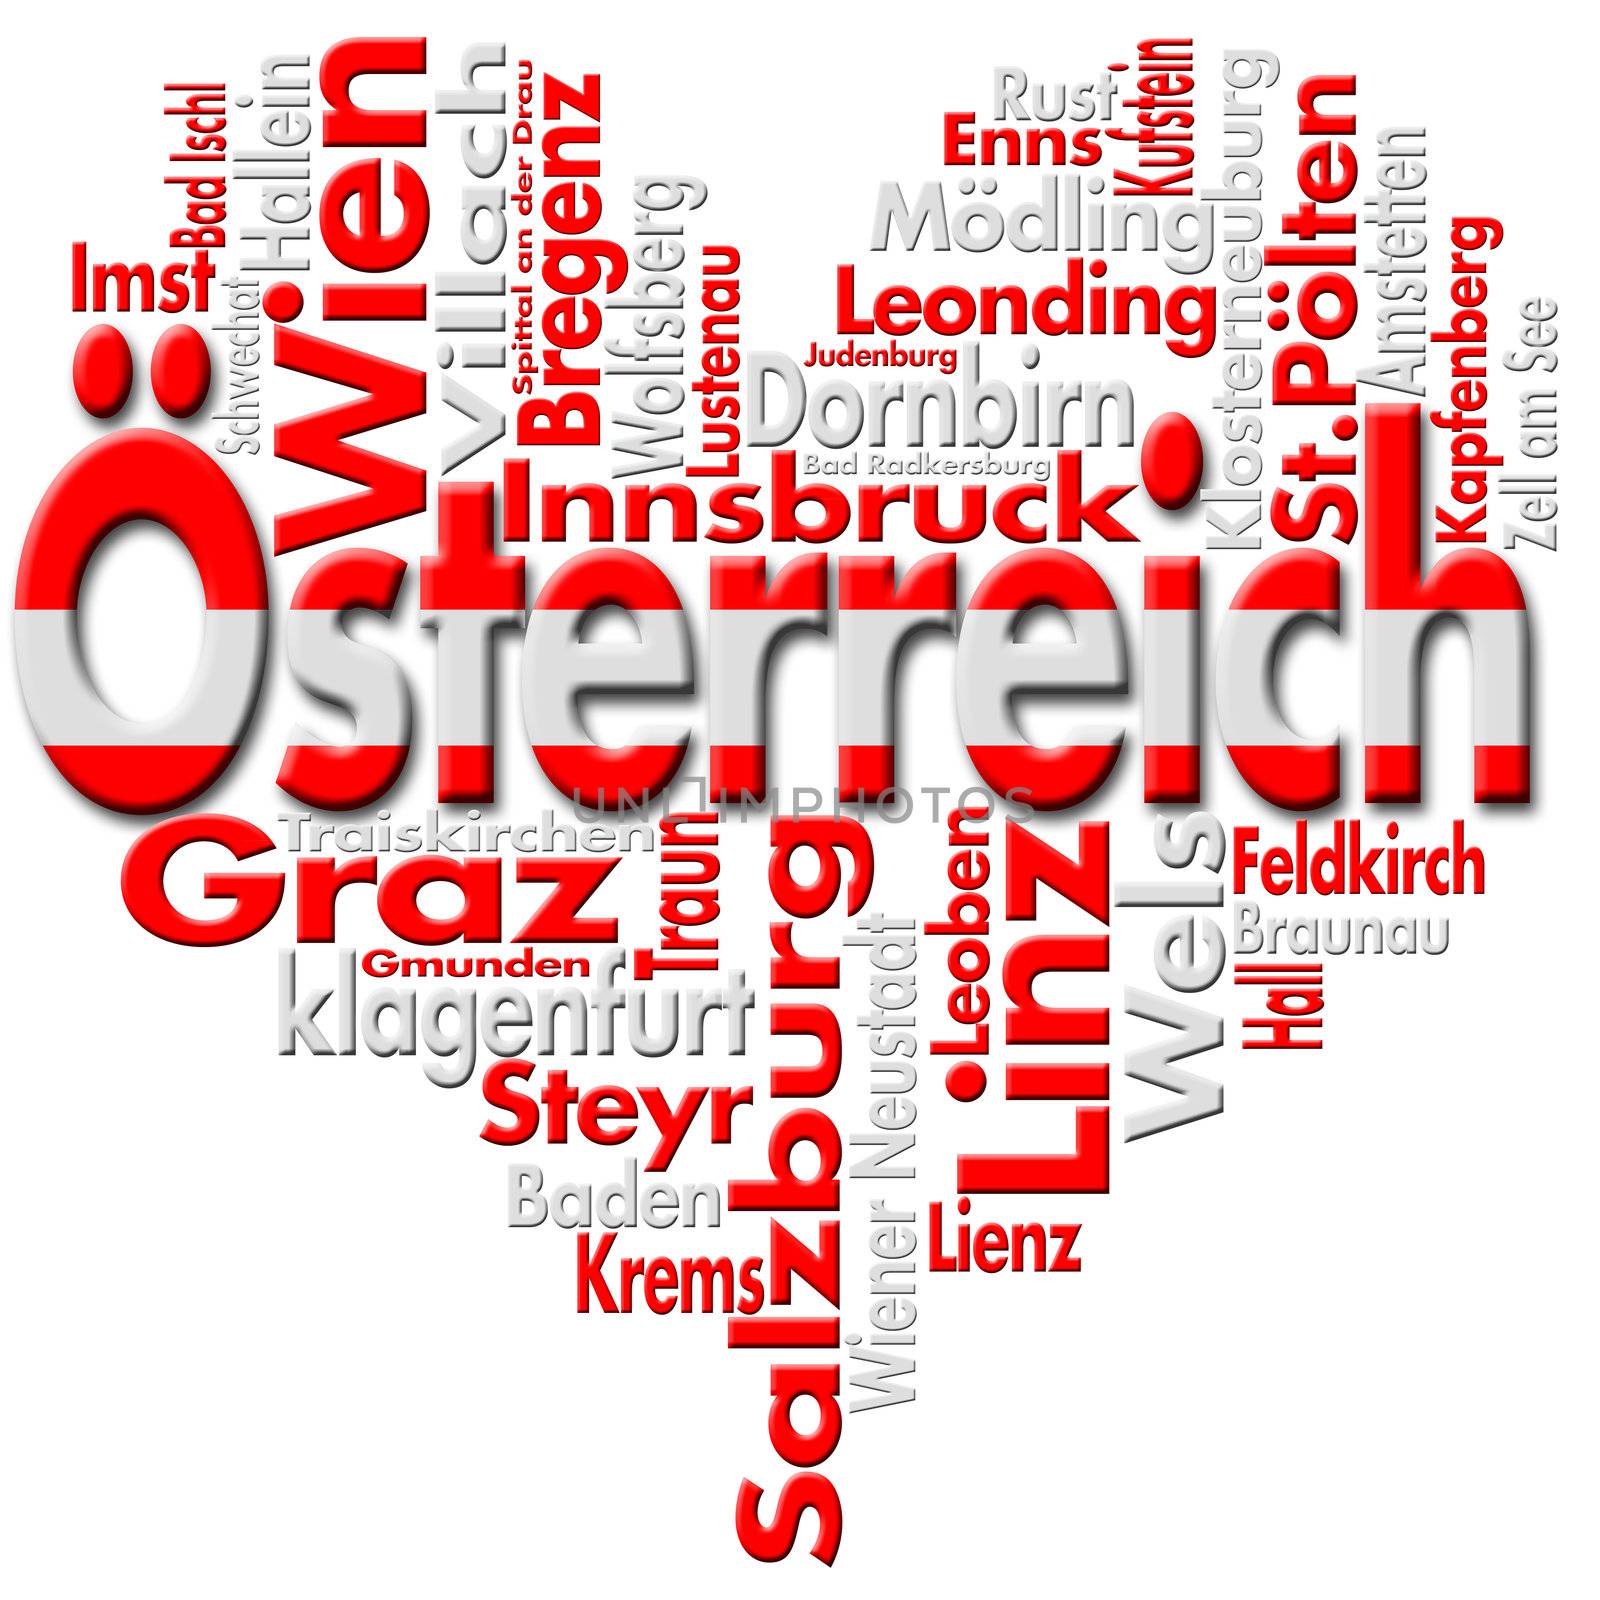 Written Österreich and Austrian cities with heart-shaped, Austrian flag colors